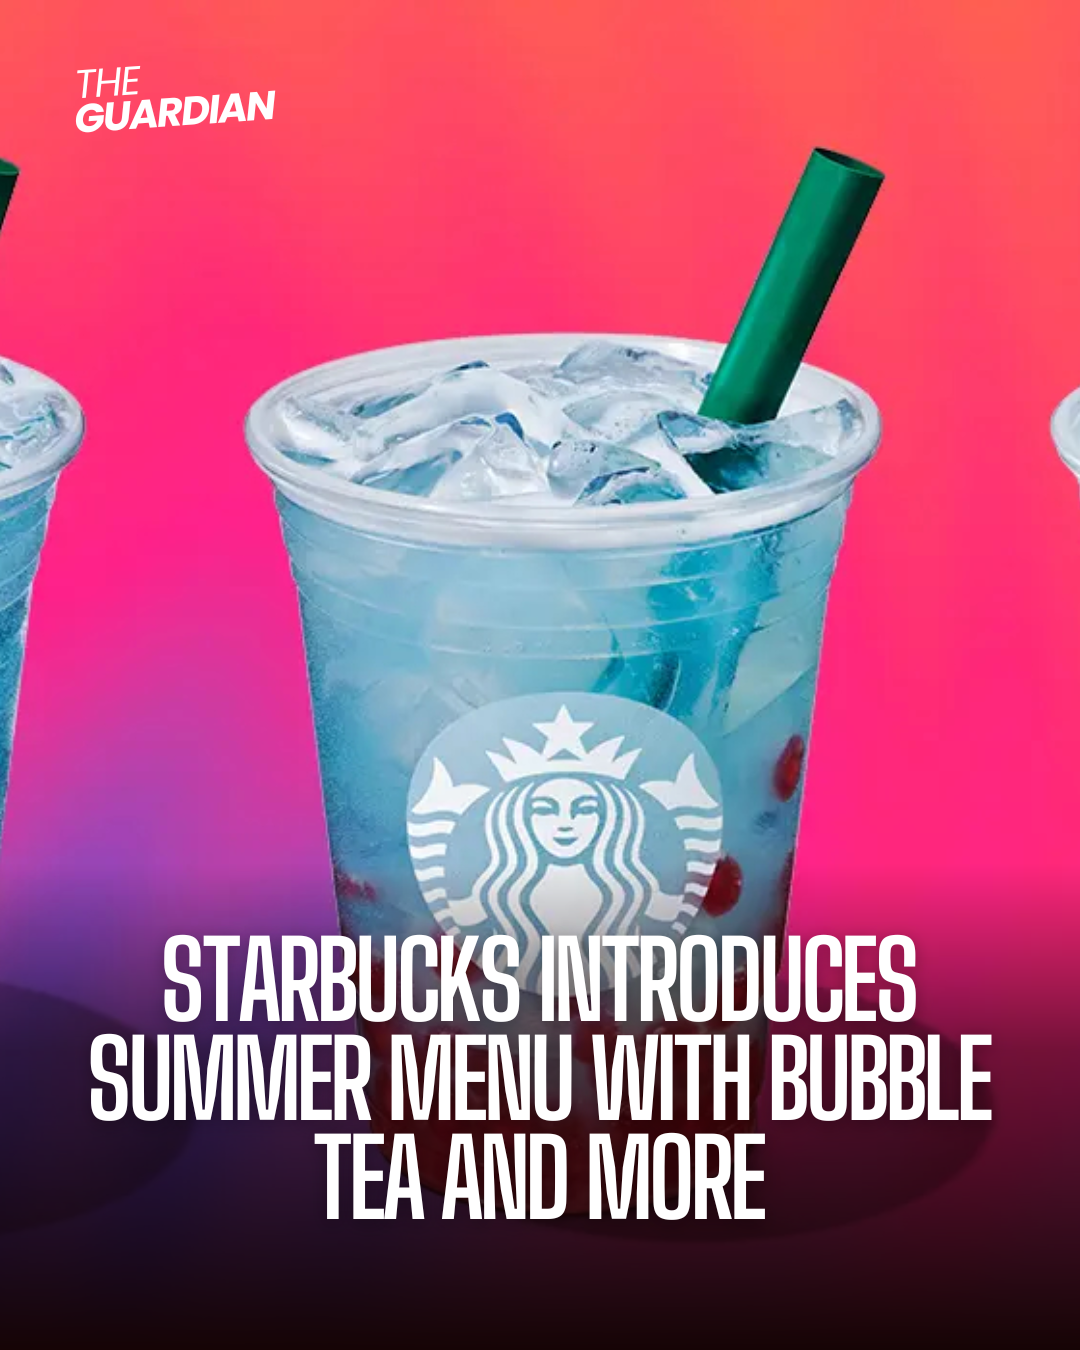 Starbucks has launched its summer menu, which includes a wonderful innovation: raspberry-flavored pearls reminiscent of bubble tea.